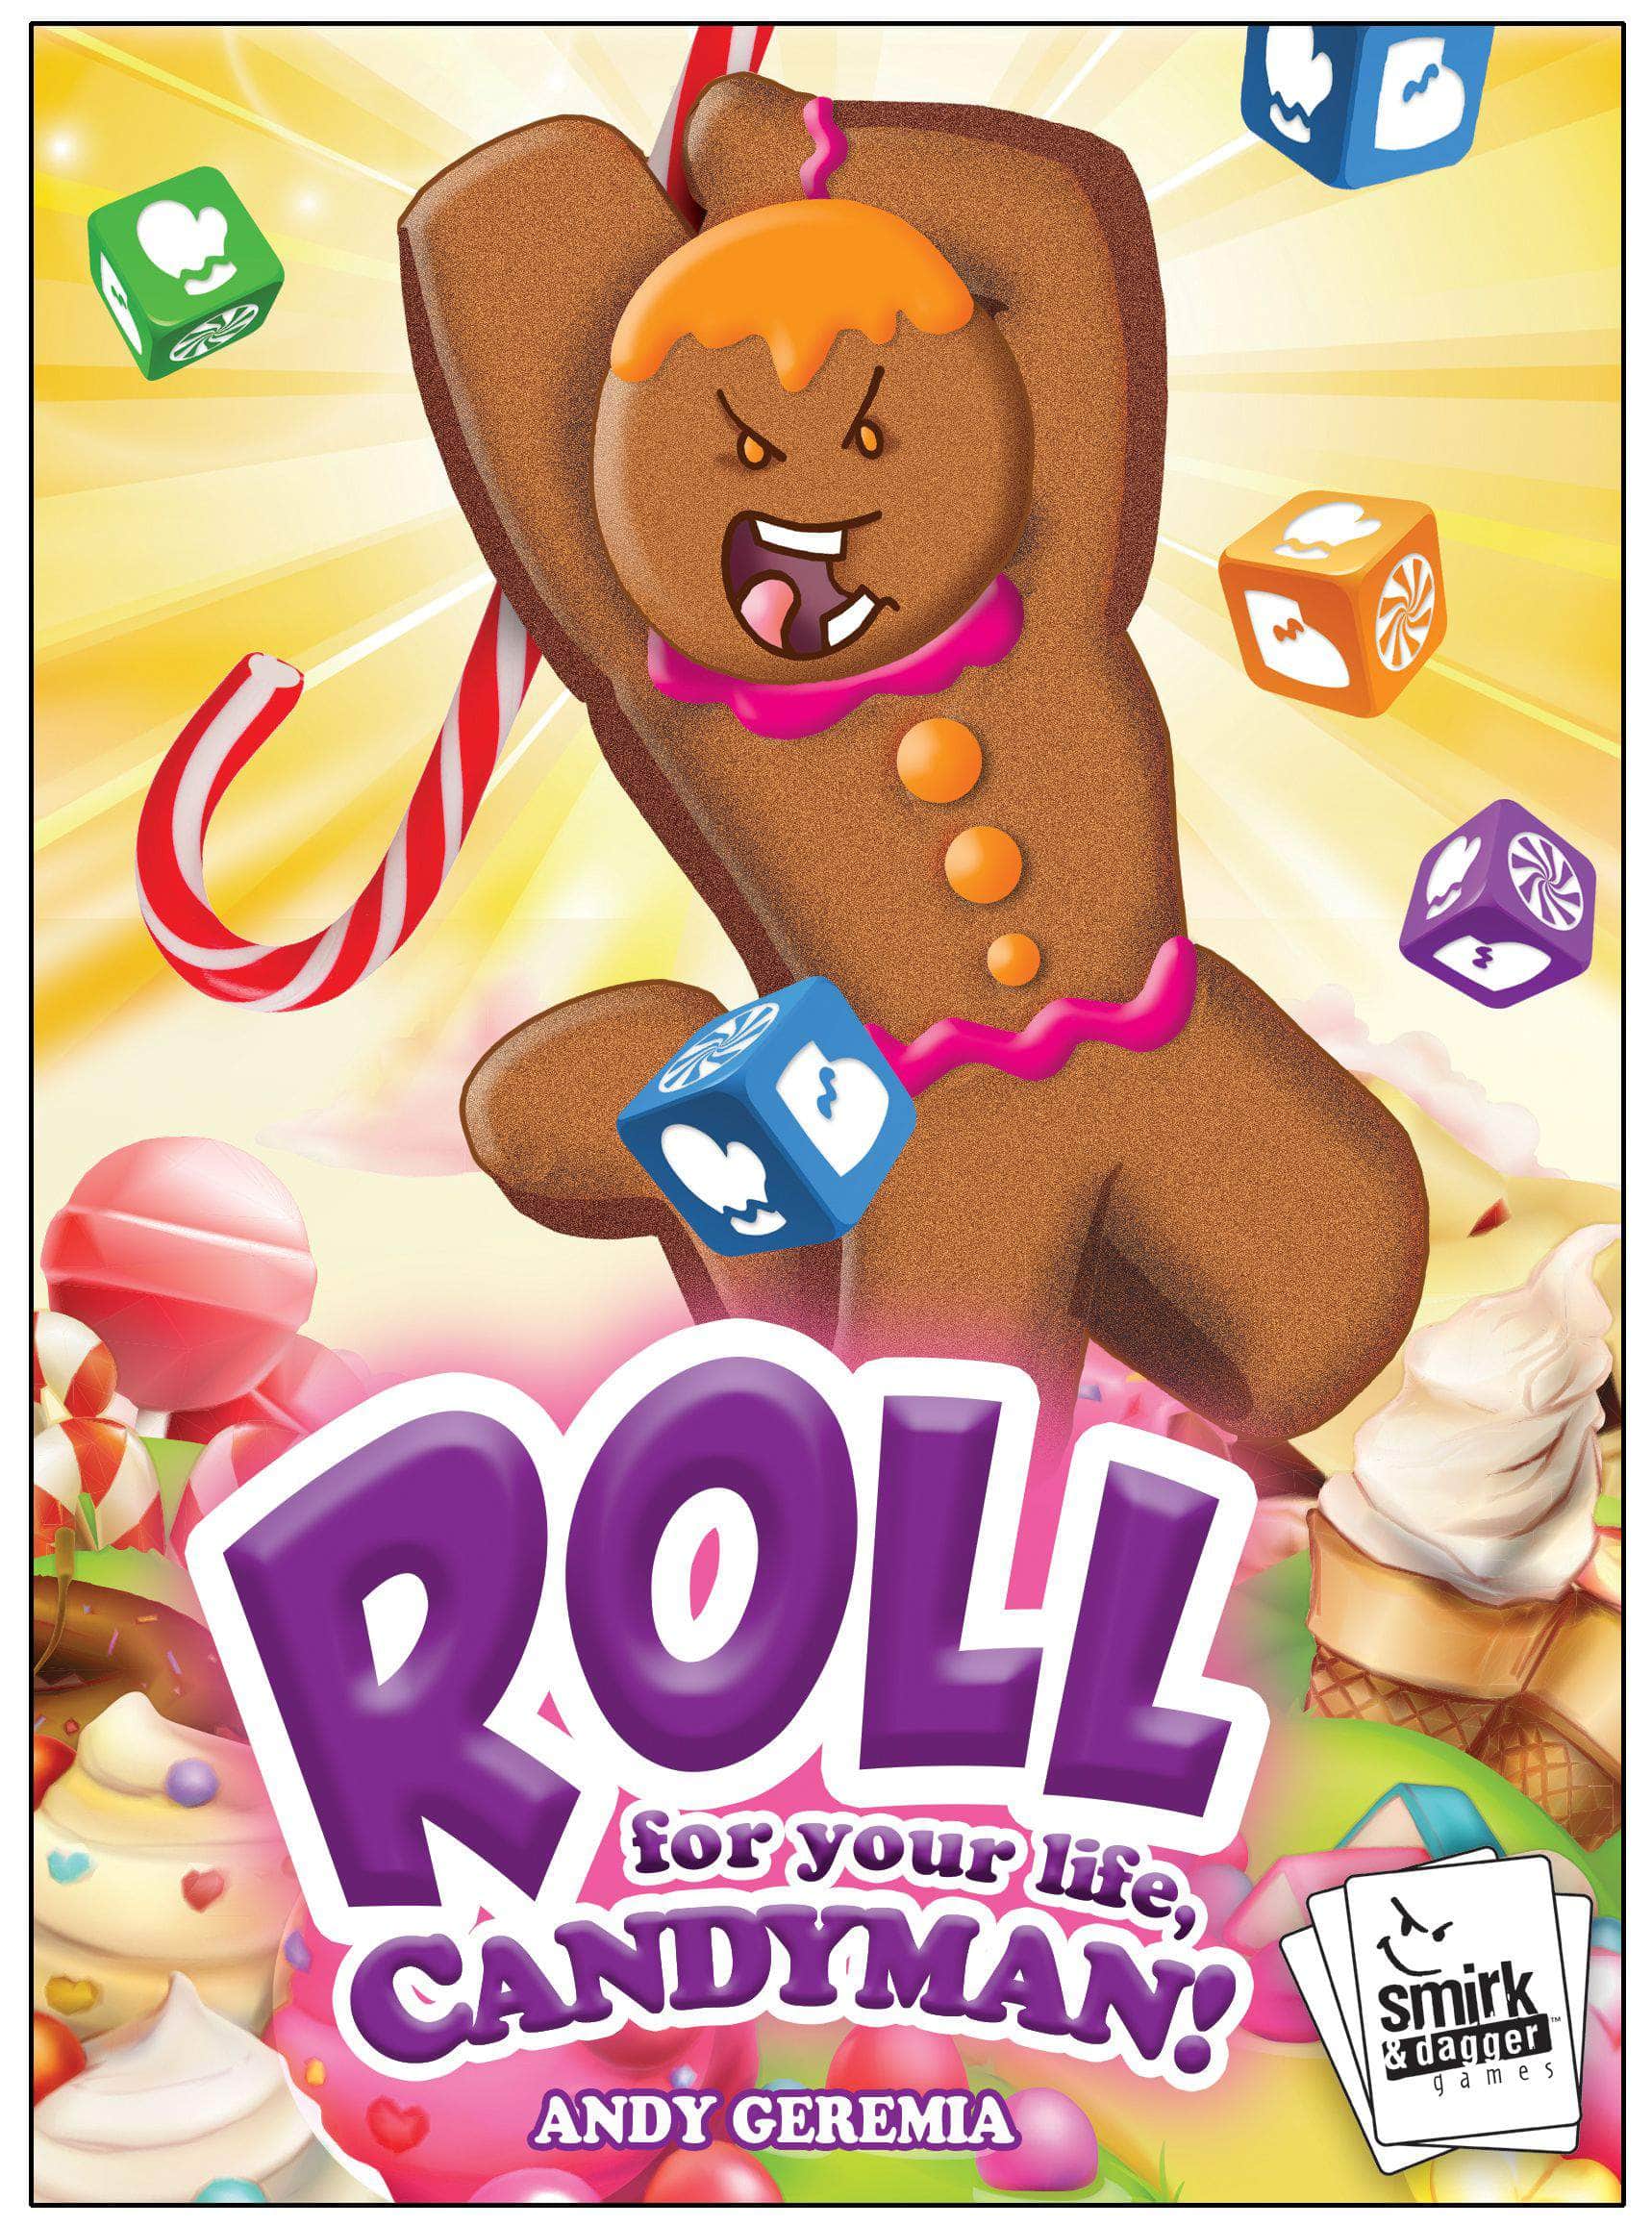 Roll for Your Life, Candyman! (Retail Edition) Retail Board Game Smirk & Dagger Games 9780974646121 KS800727A